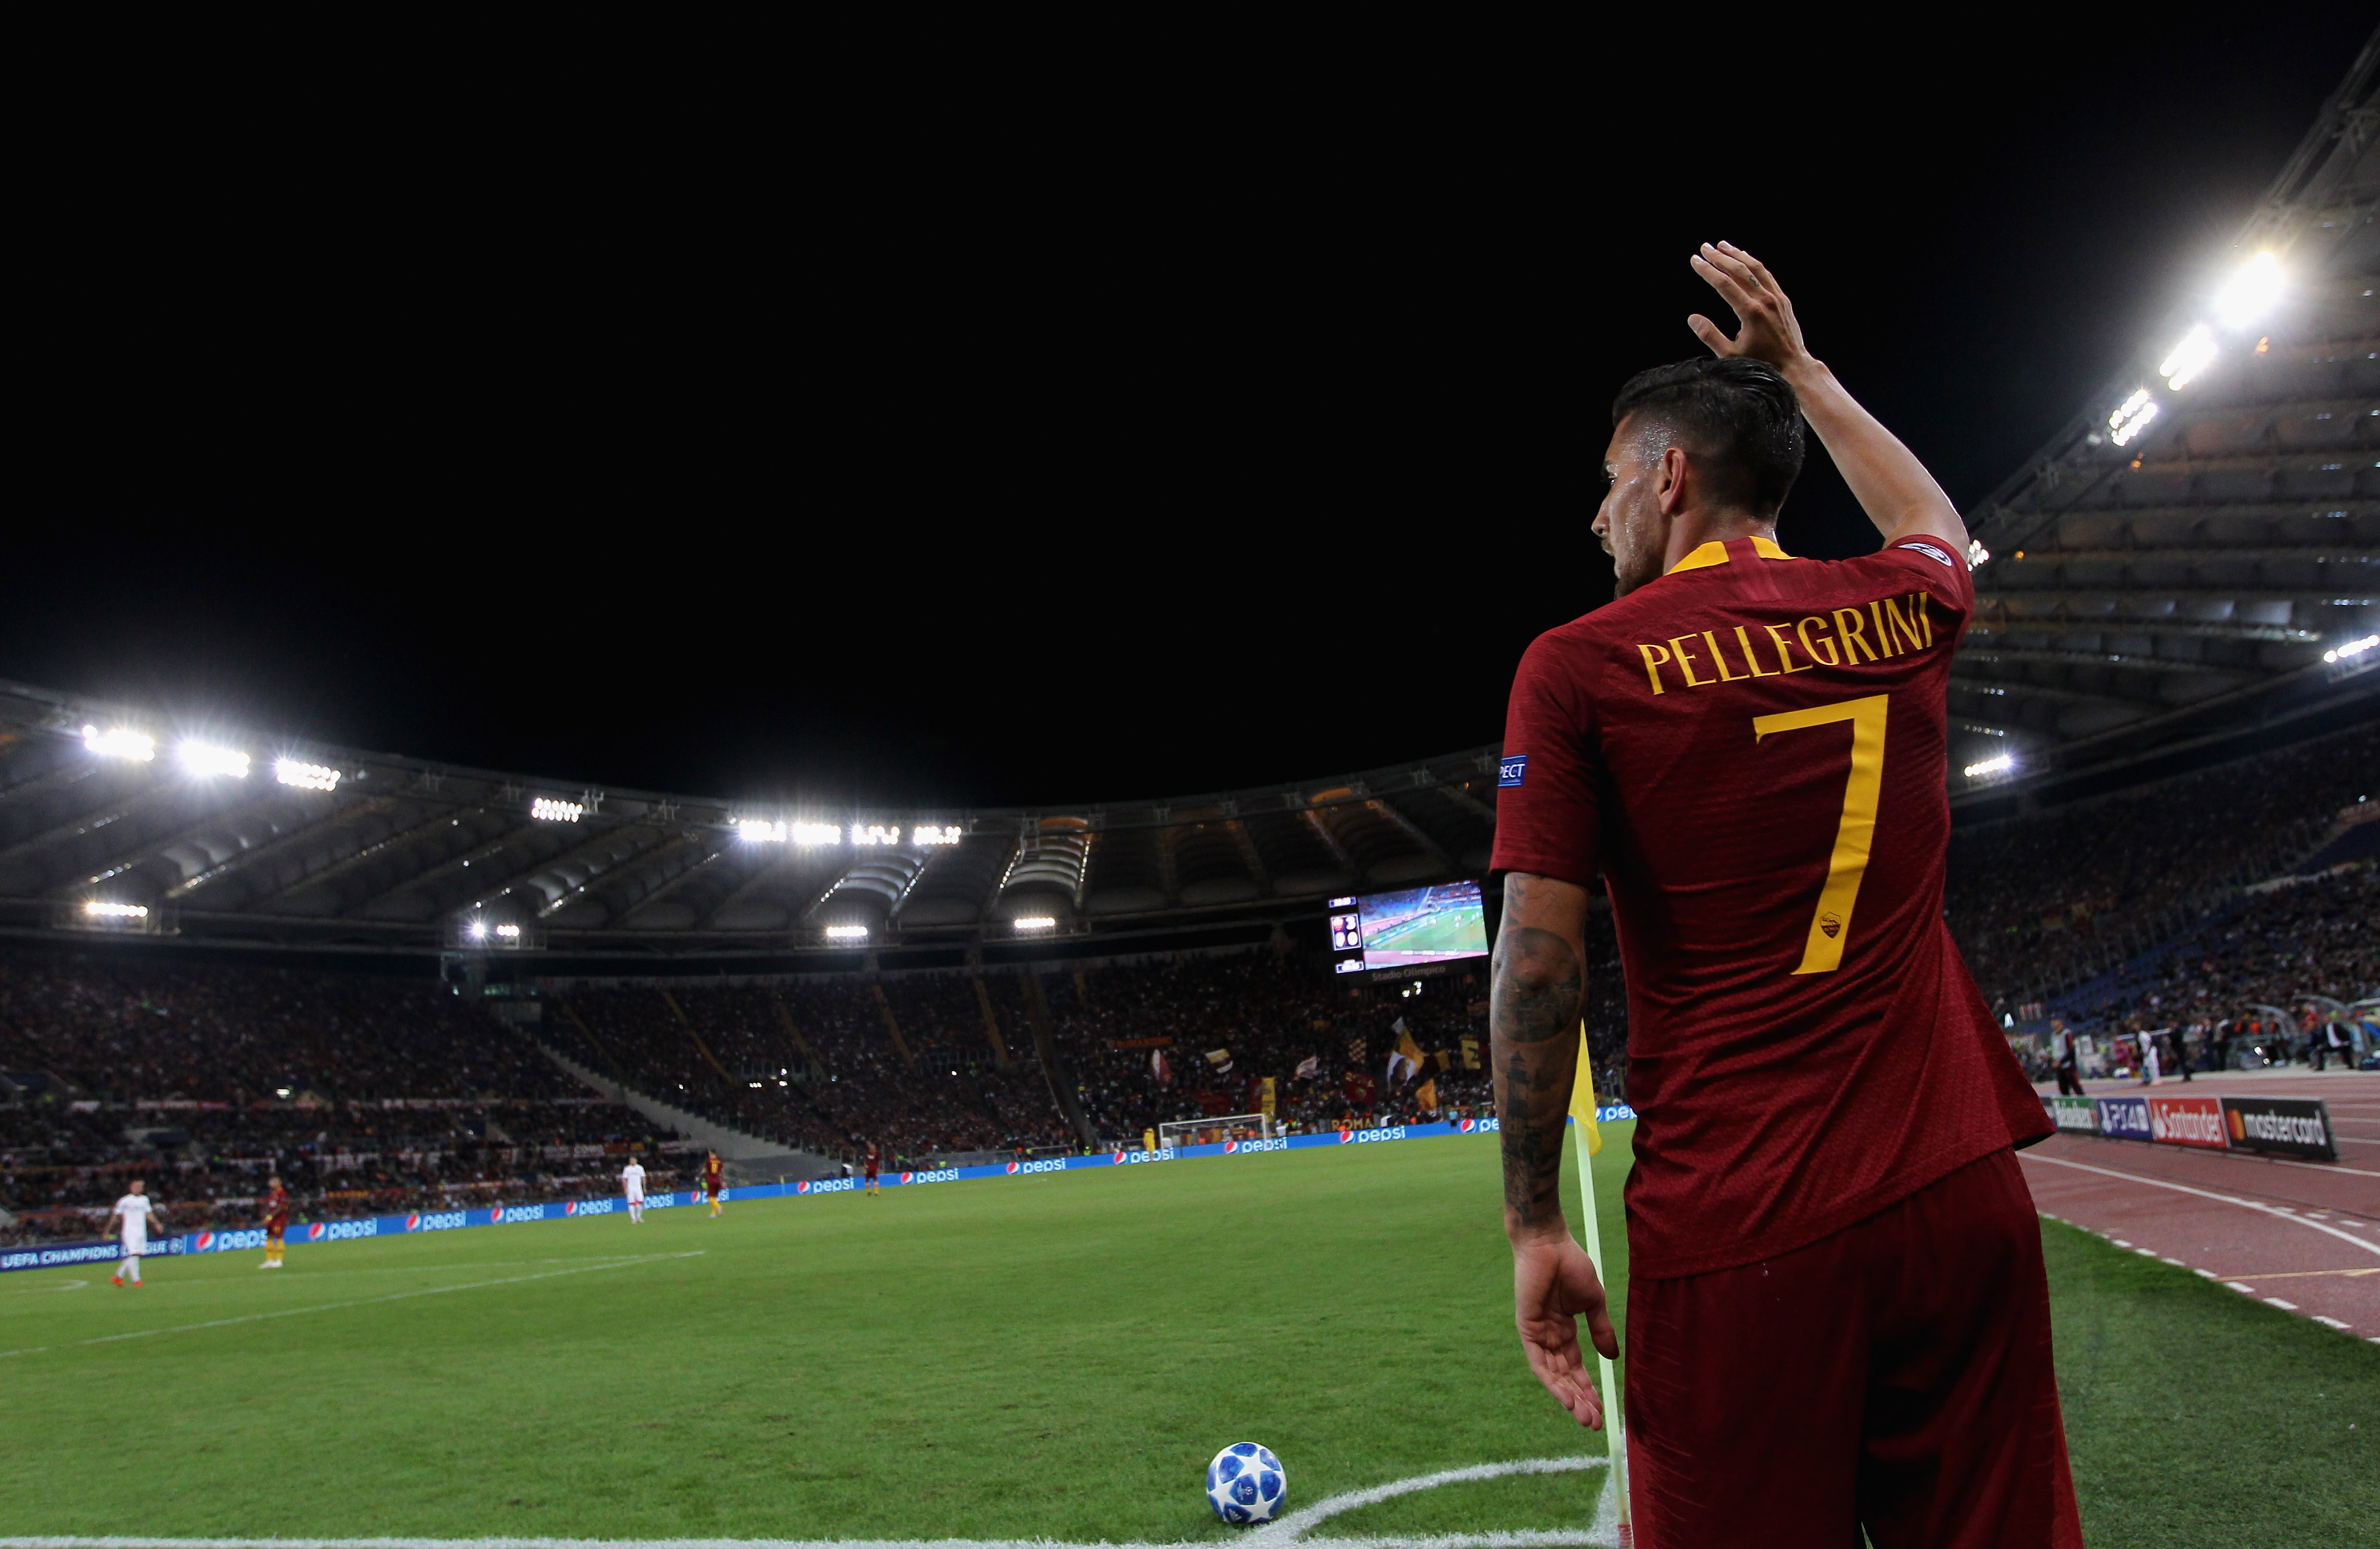 ROME, ITALY - OCTOBER 02:  Lorenzo Pellegrini of AS Roma from shouders gestures during the Group G match of the UEFA Champions League between AS Roma and Viktoria Plzen at Stadio Olimpico on October 2, 2018 in Rome, Italy.  (Photo by Paolo Bruno/Getty Images)